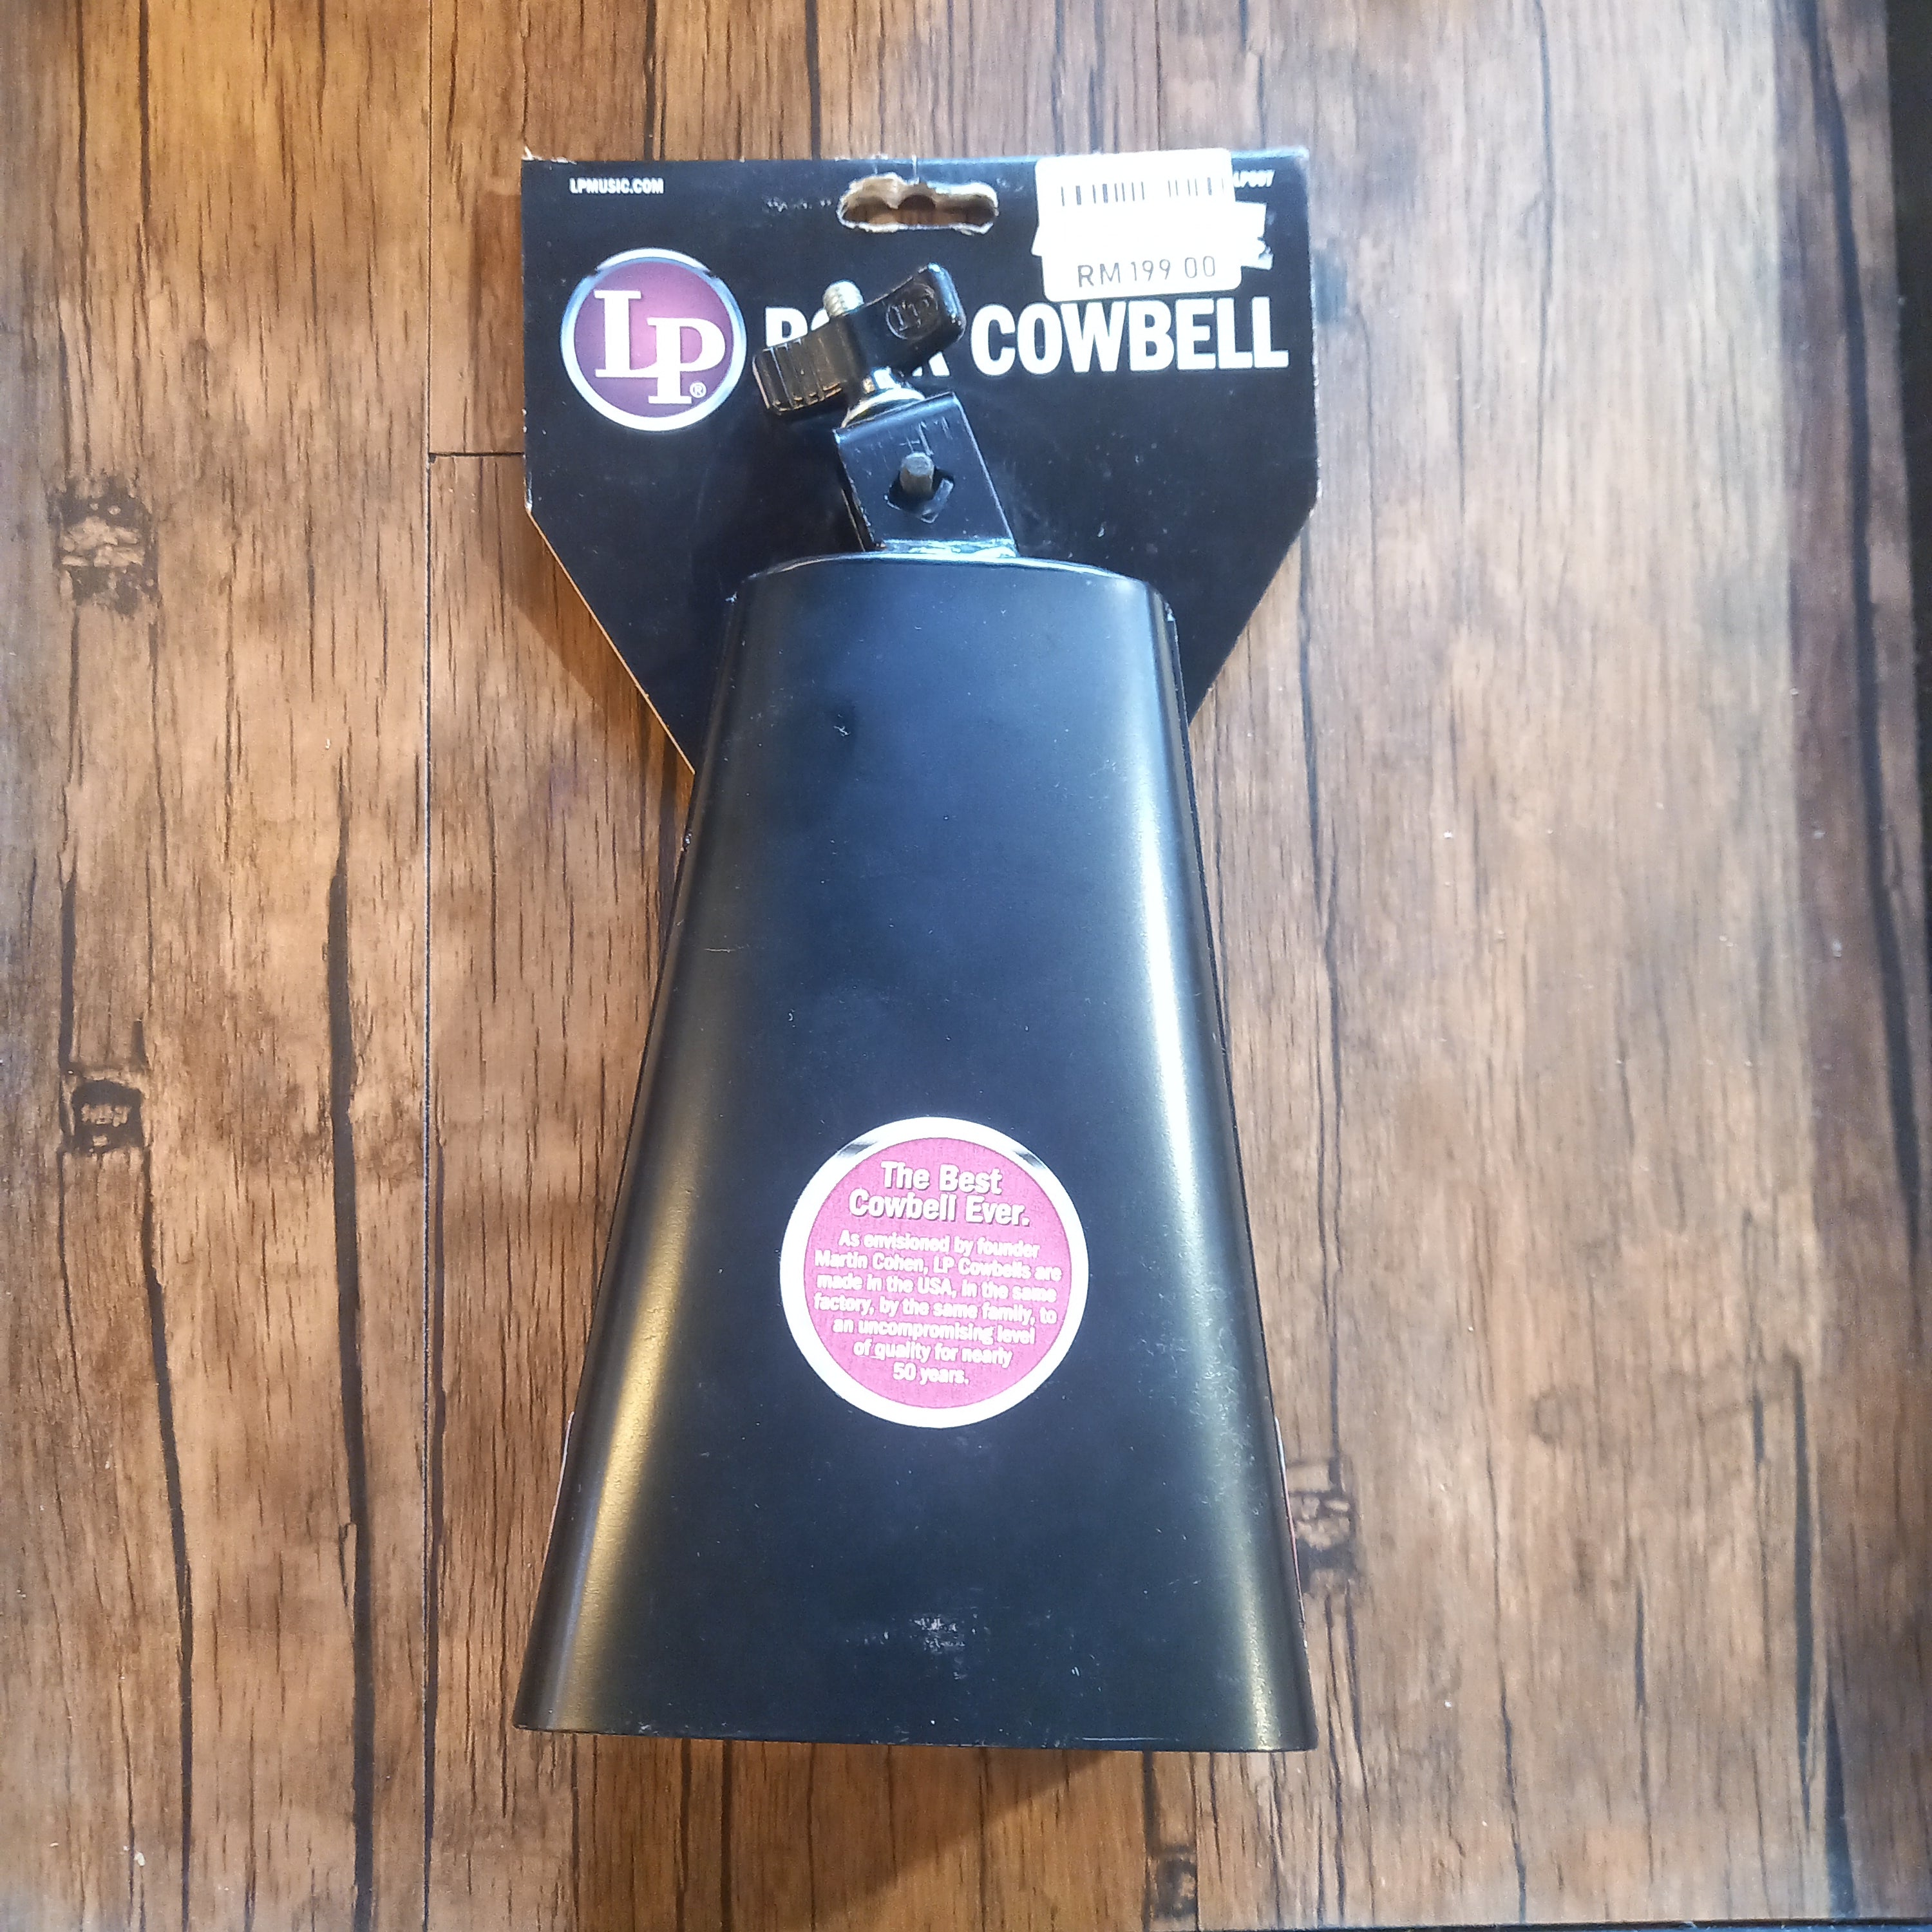 DISPLAY CLEARANCE - LP ROCK COWBELL | LP , Zoso Music